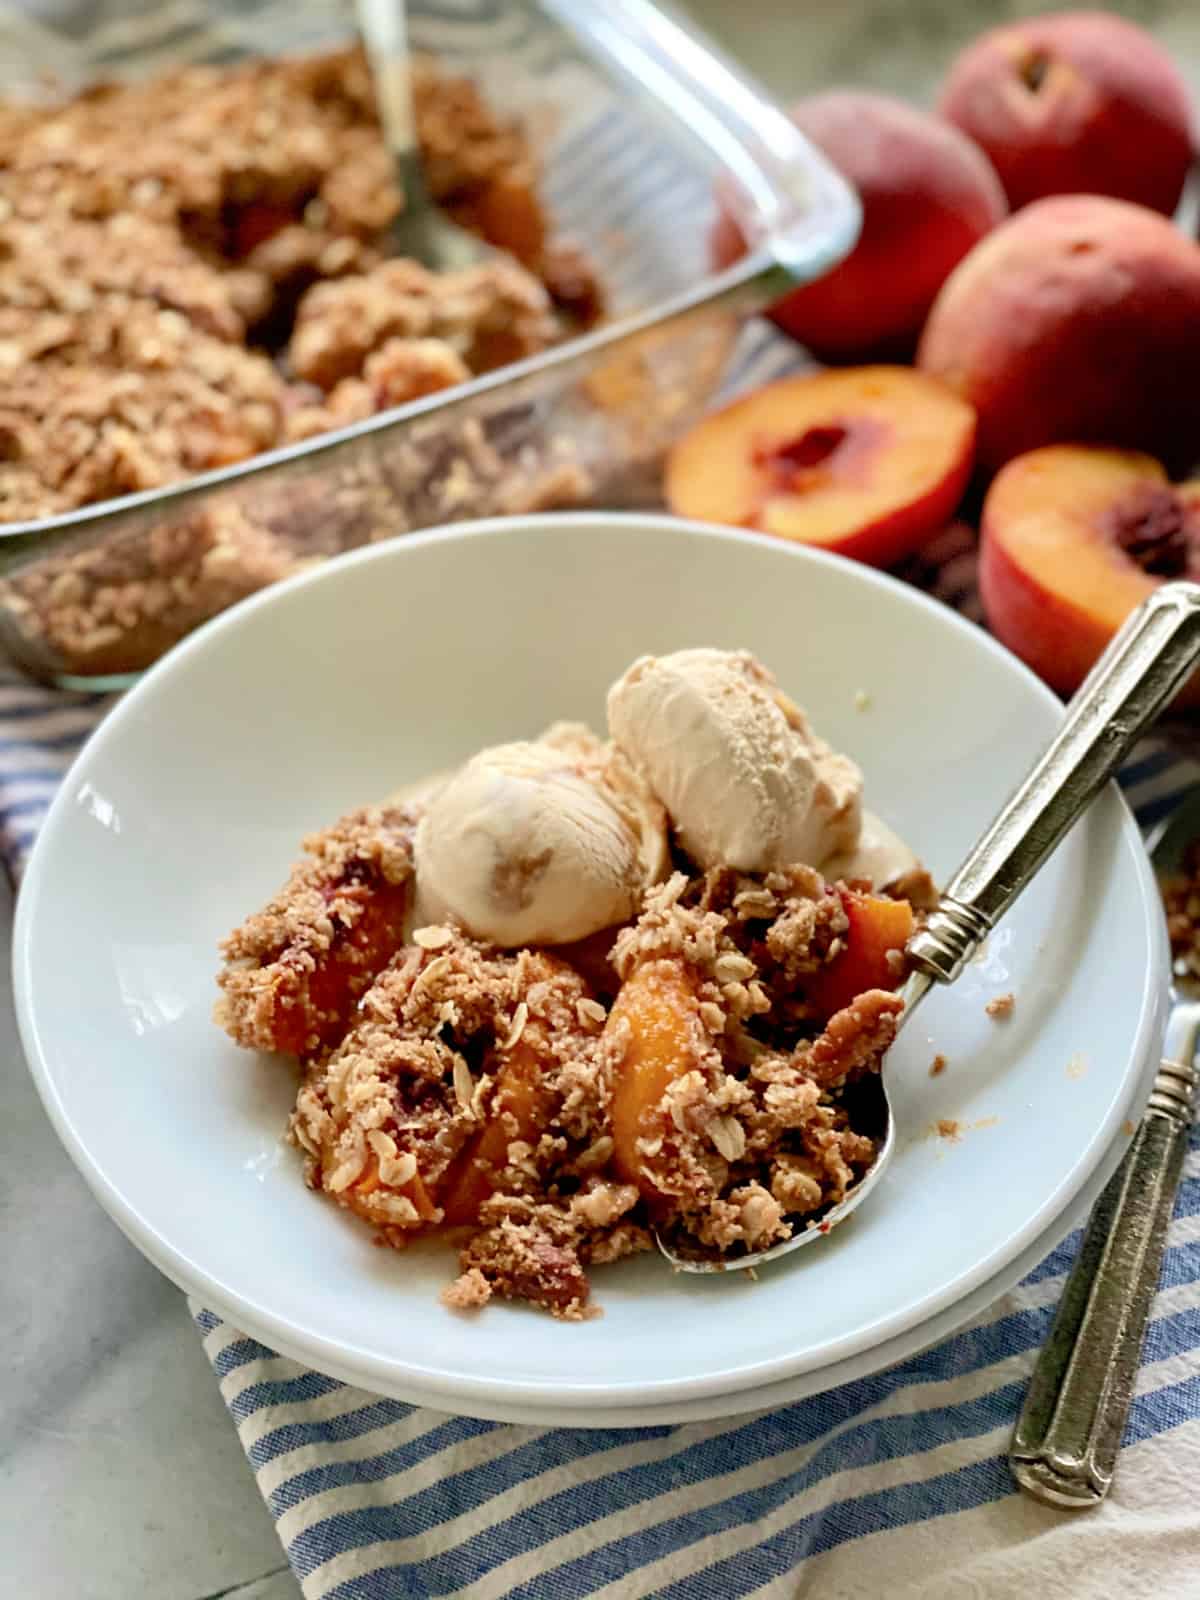 White shallow bowl filled with peach crisp and caramel ice cream with a spoon and peaches in the background.